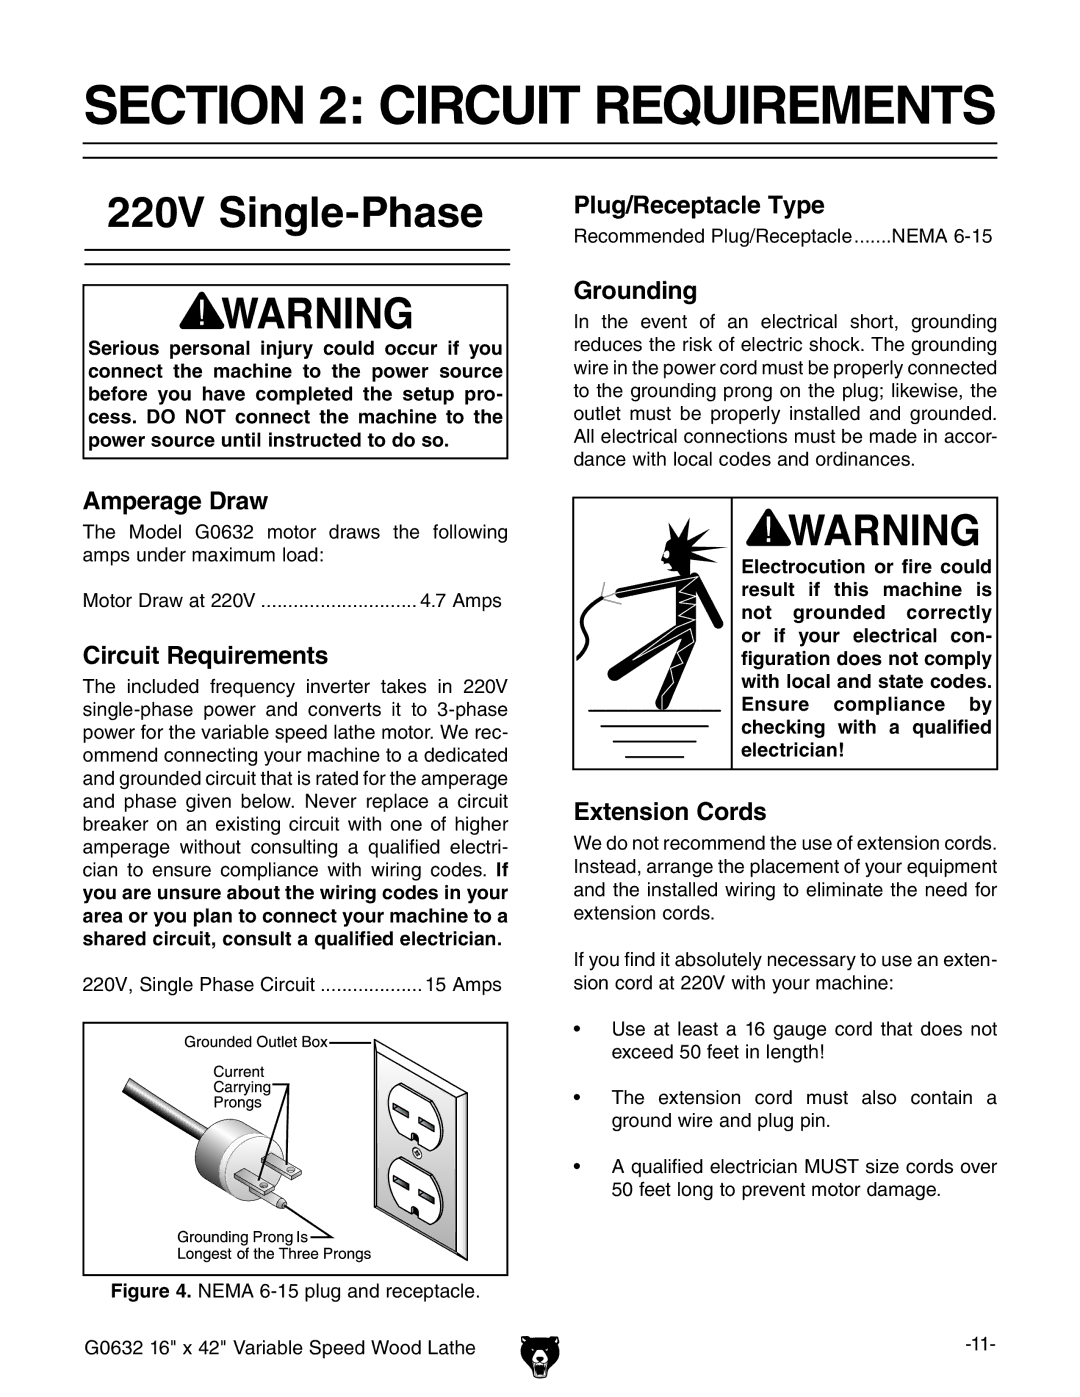 Grizzly G0632 owner manual Circuit Requirements, 220V Single-Phase 